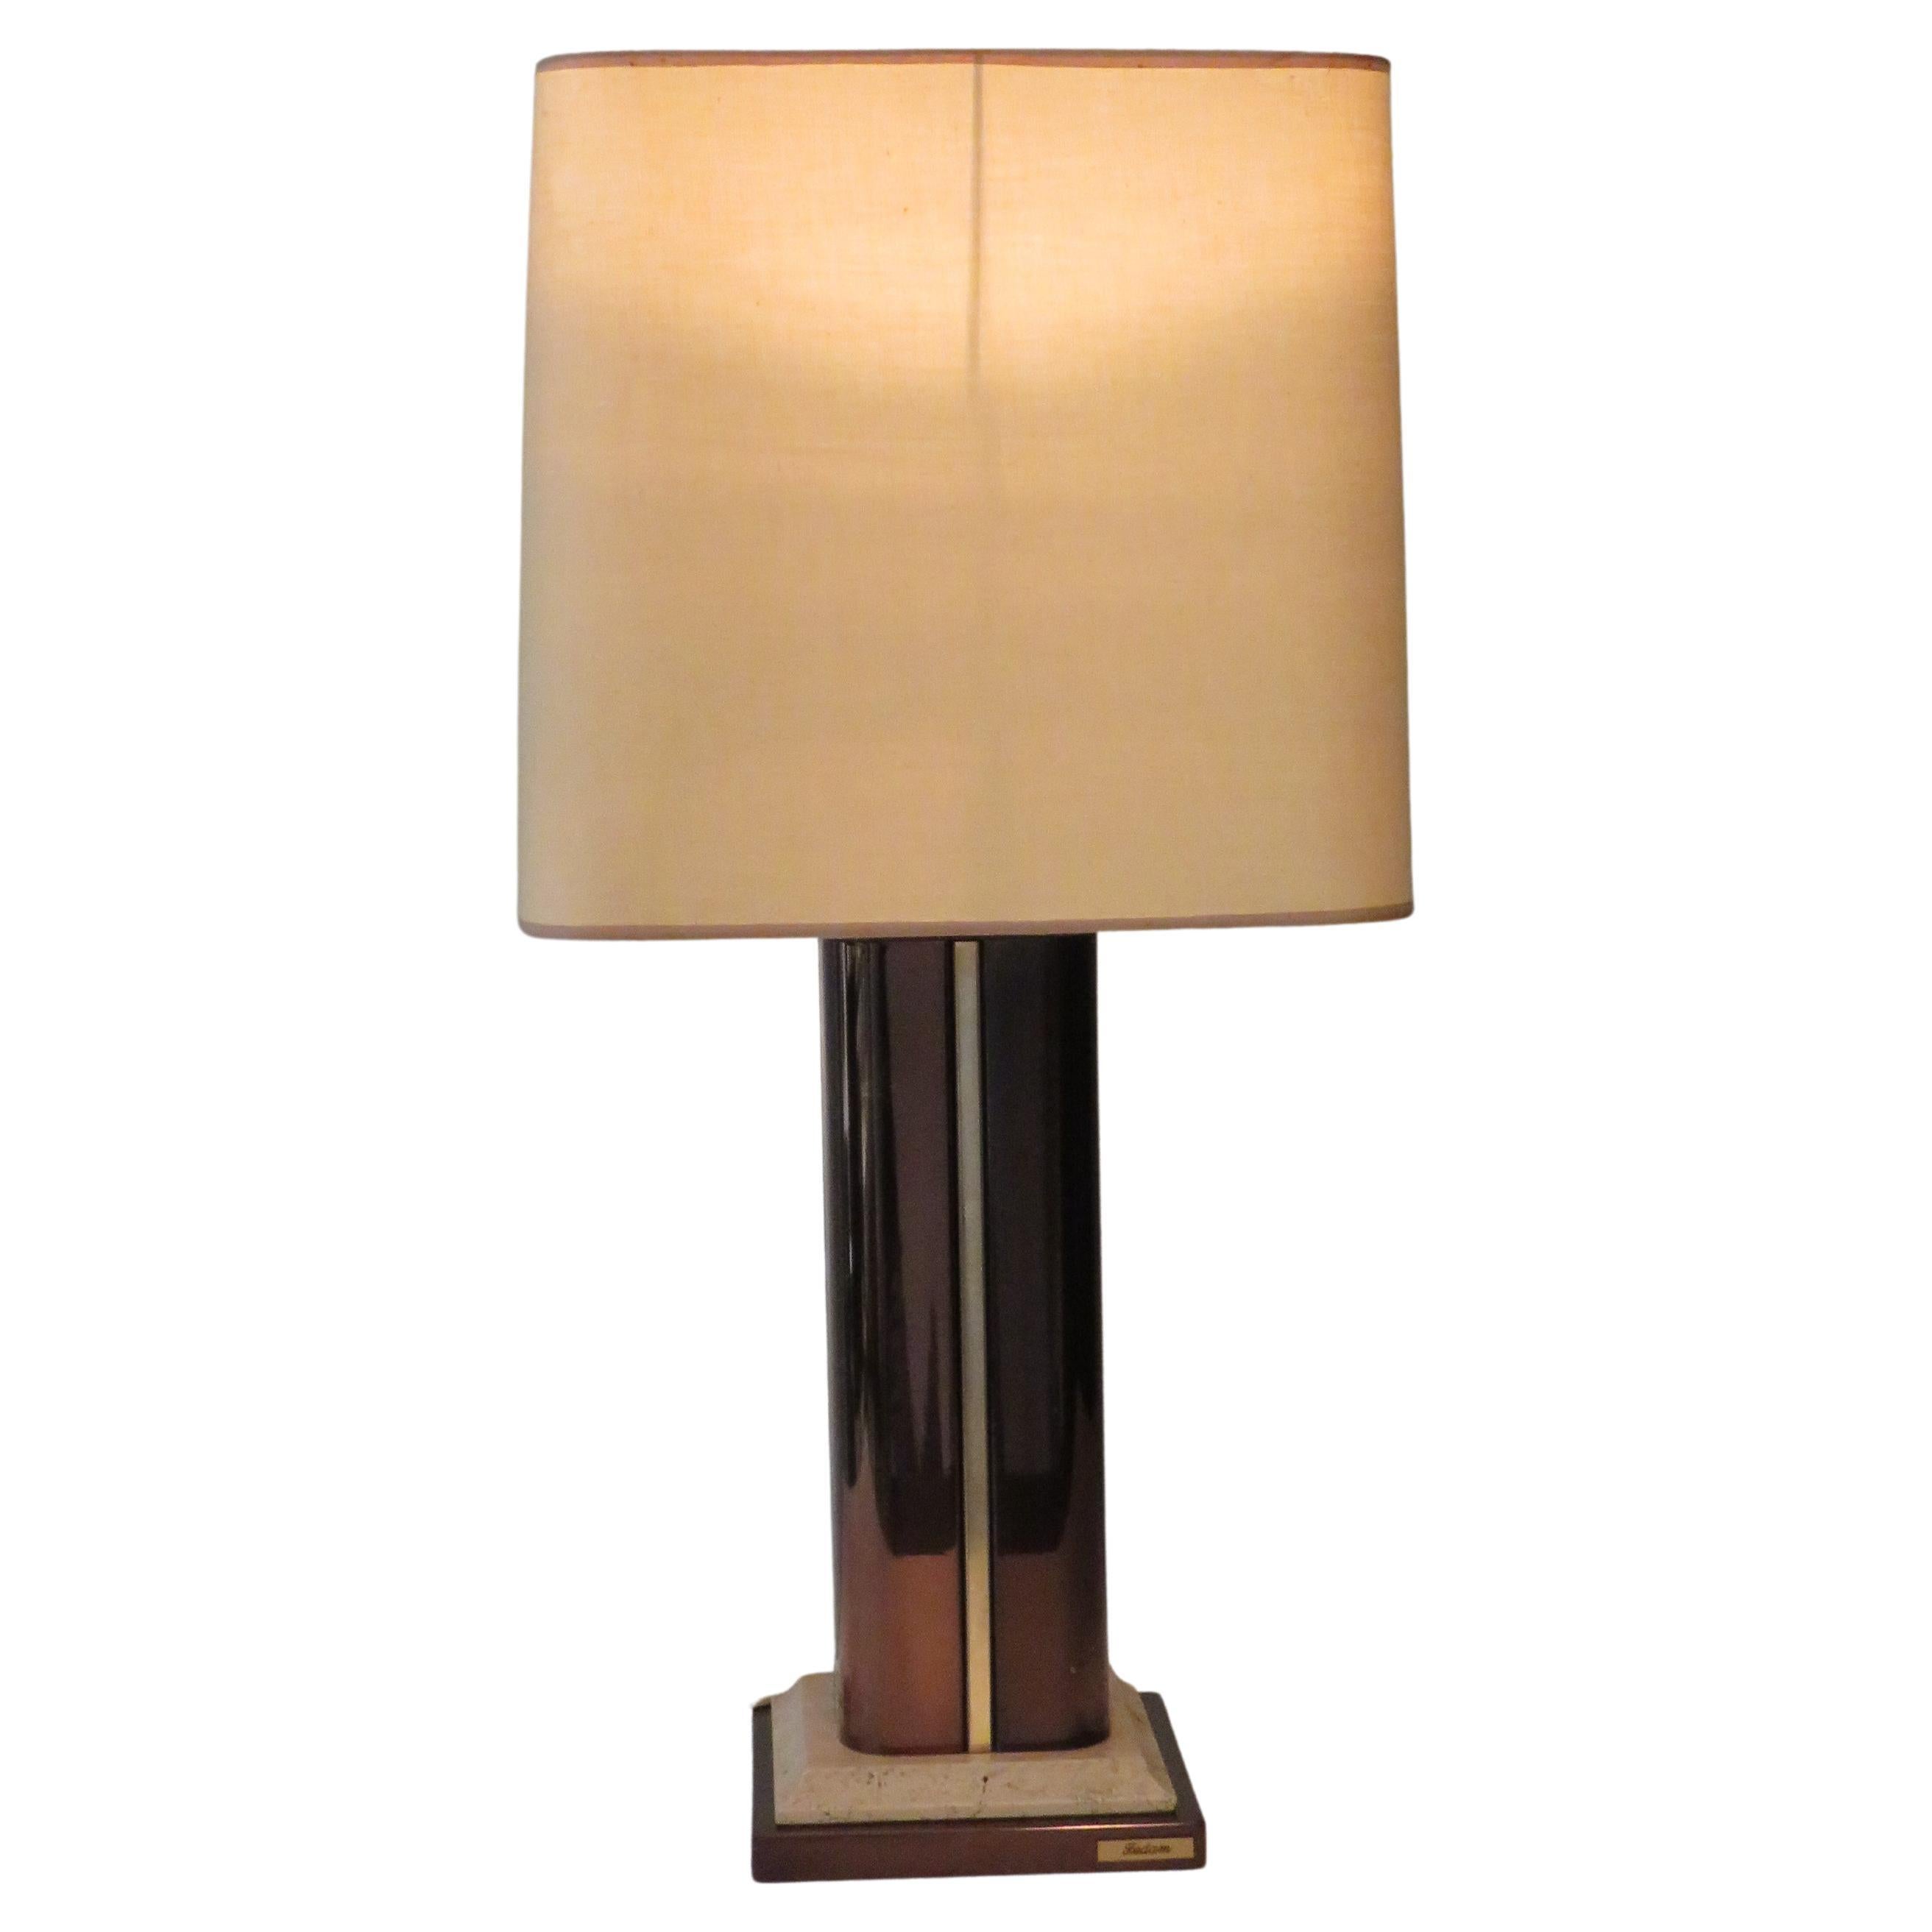 Mid Century Travertine Table Lamp by Fedam in Hollywood Regency Style